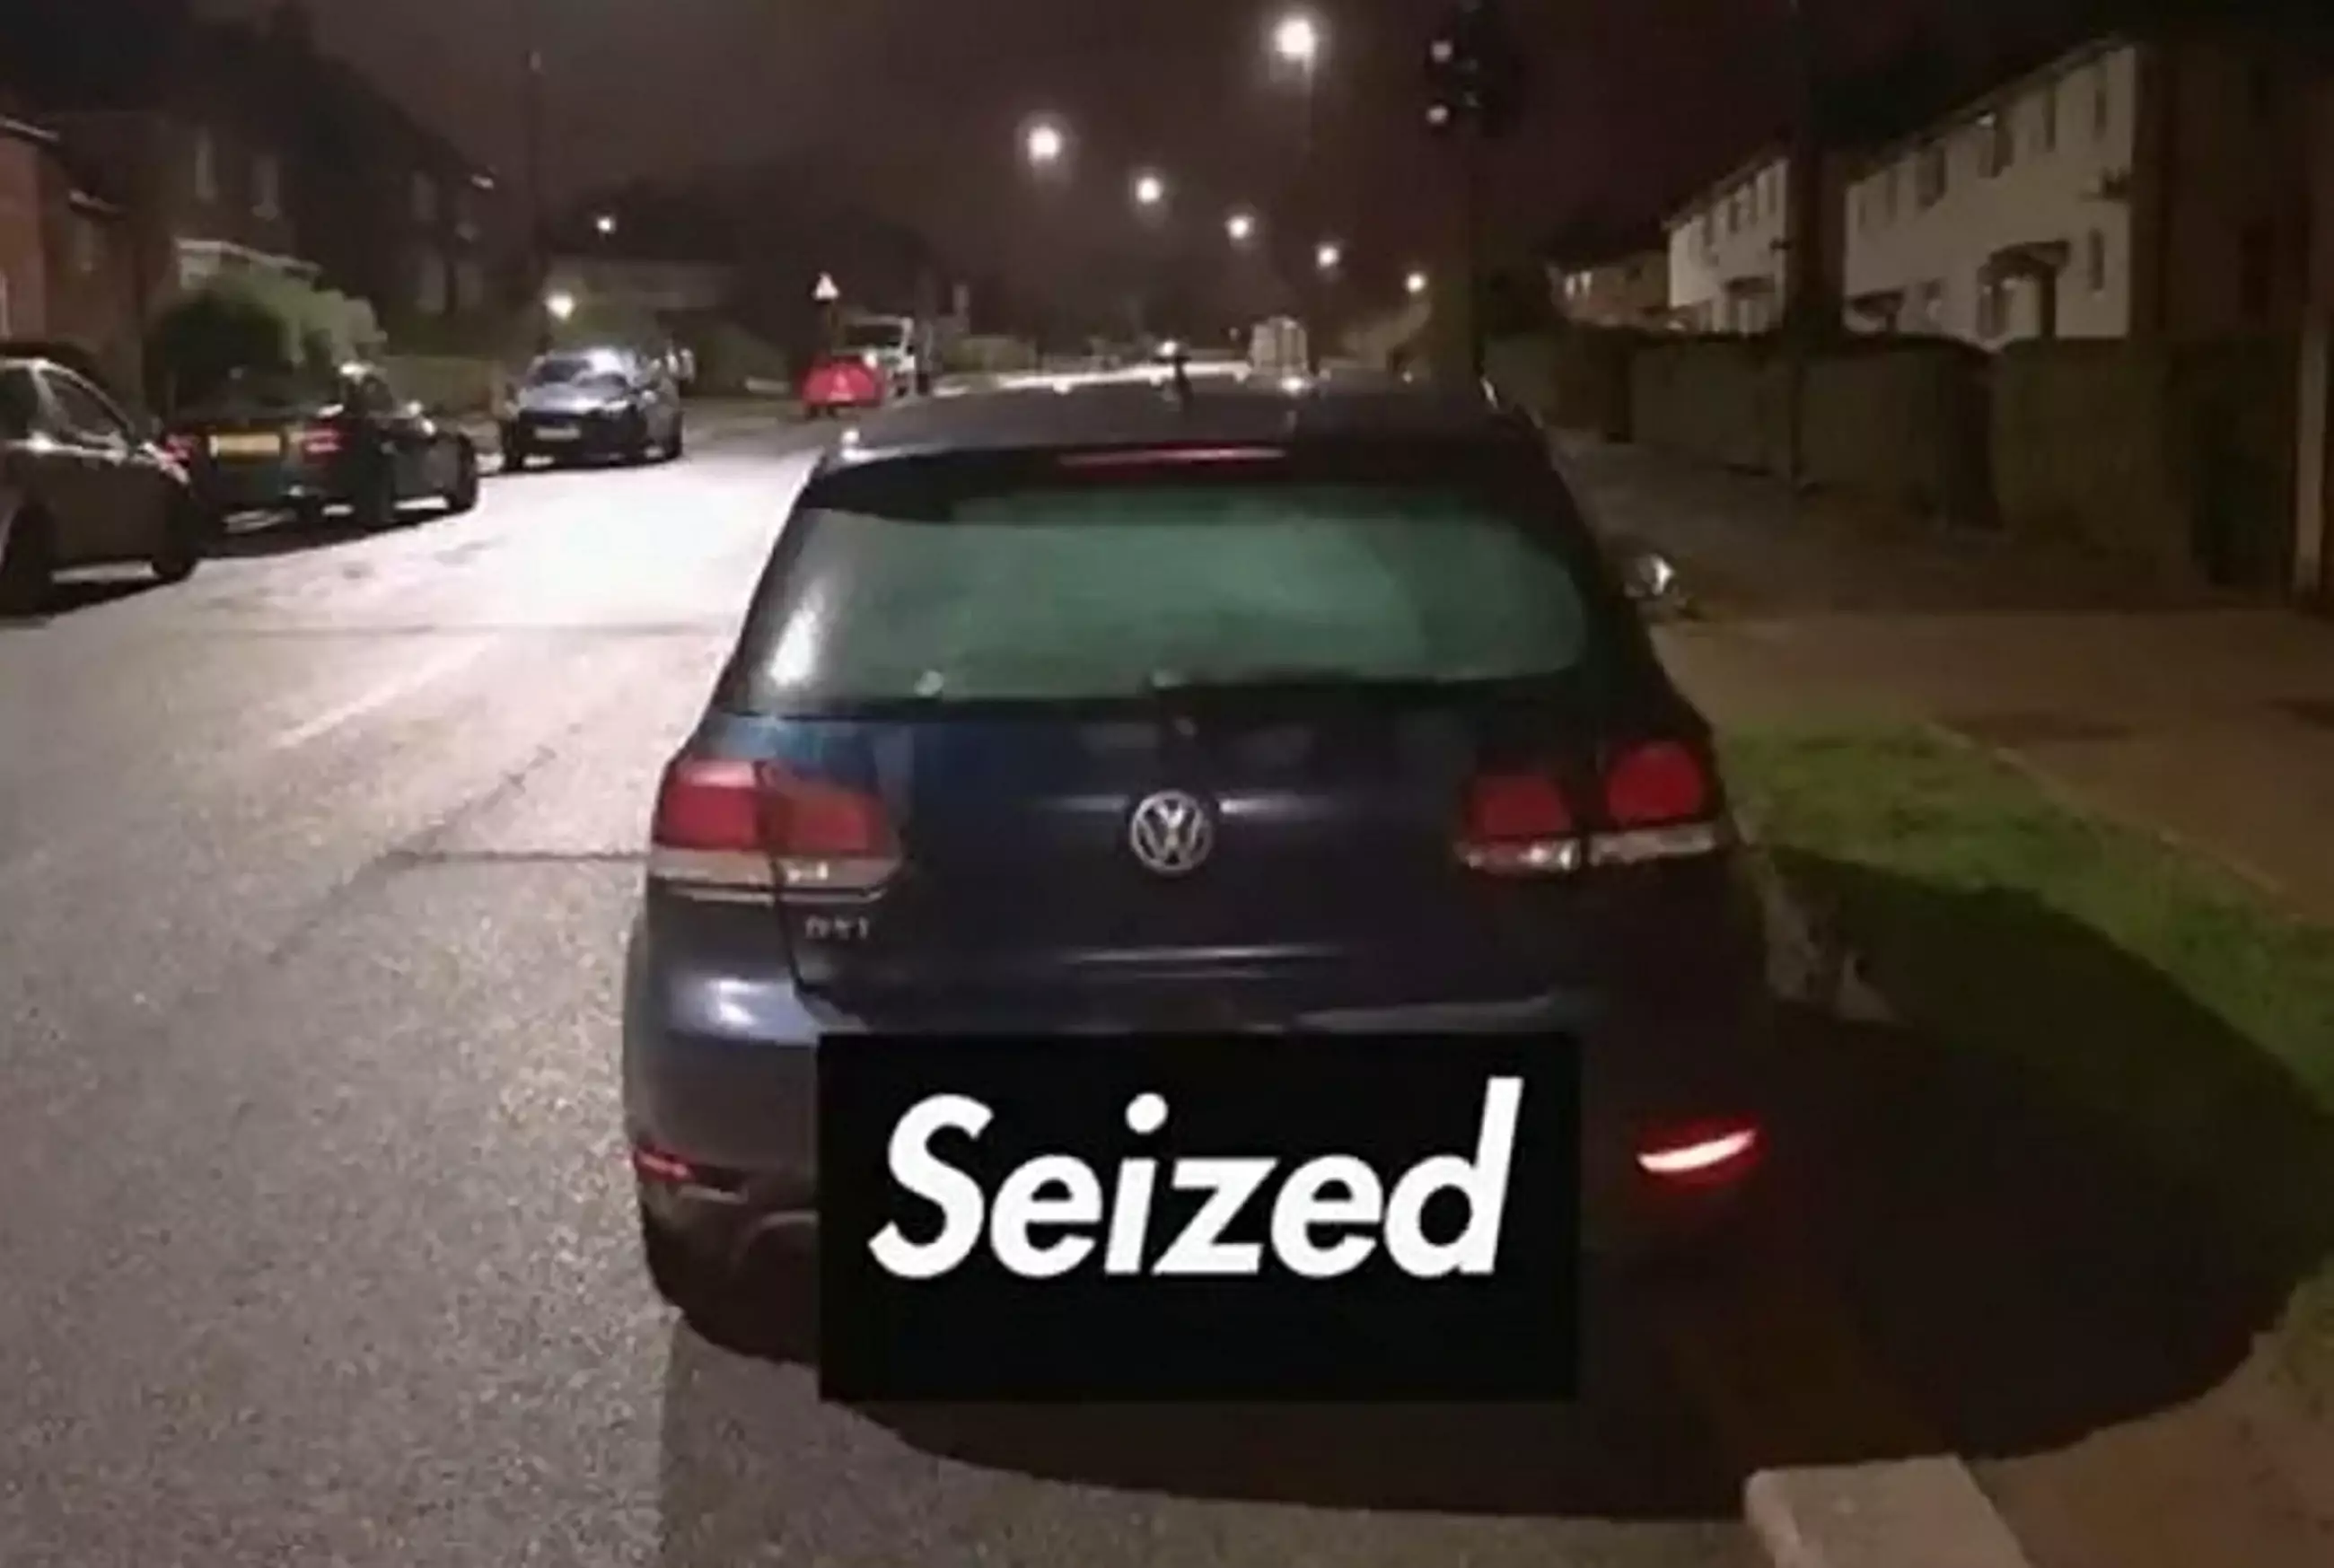 After checking the driver's details police found he wasn't insured.